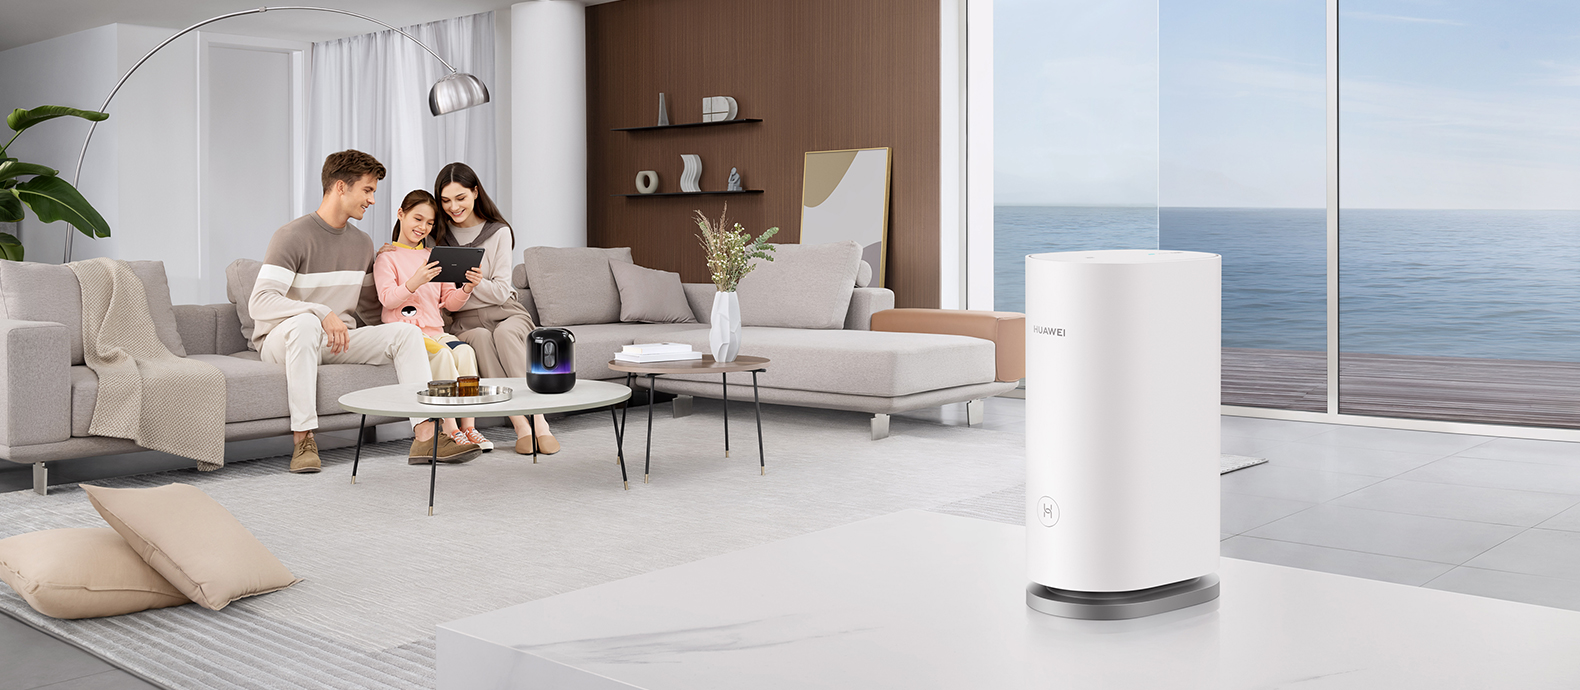 HUAWEI AI Life Router Picture